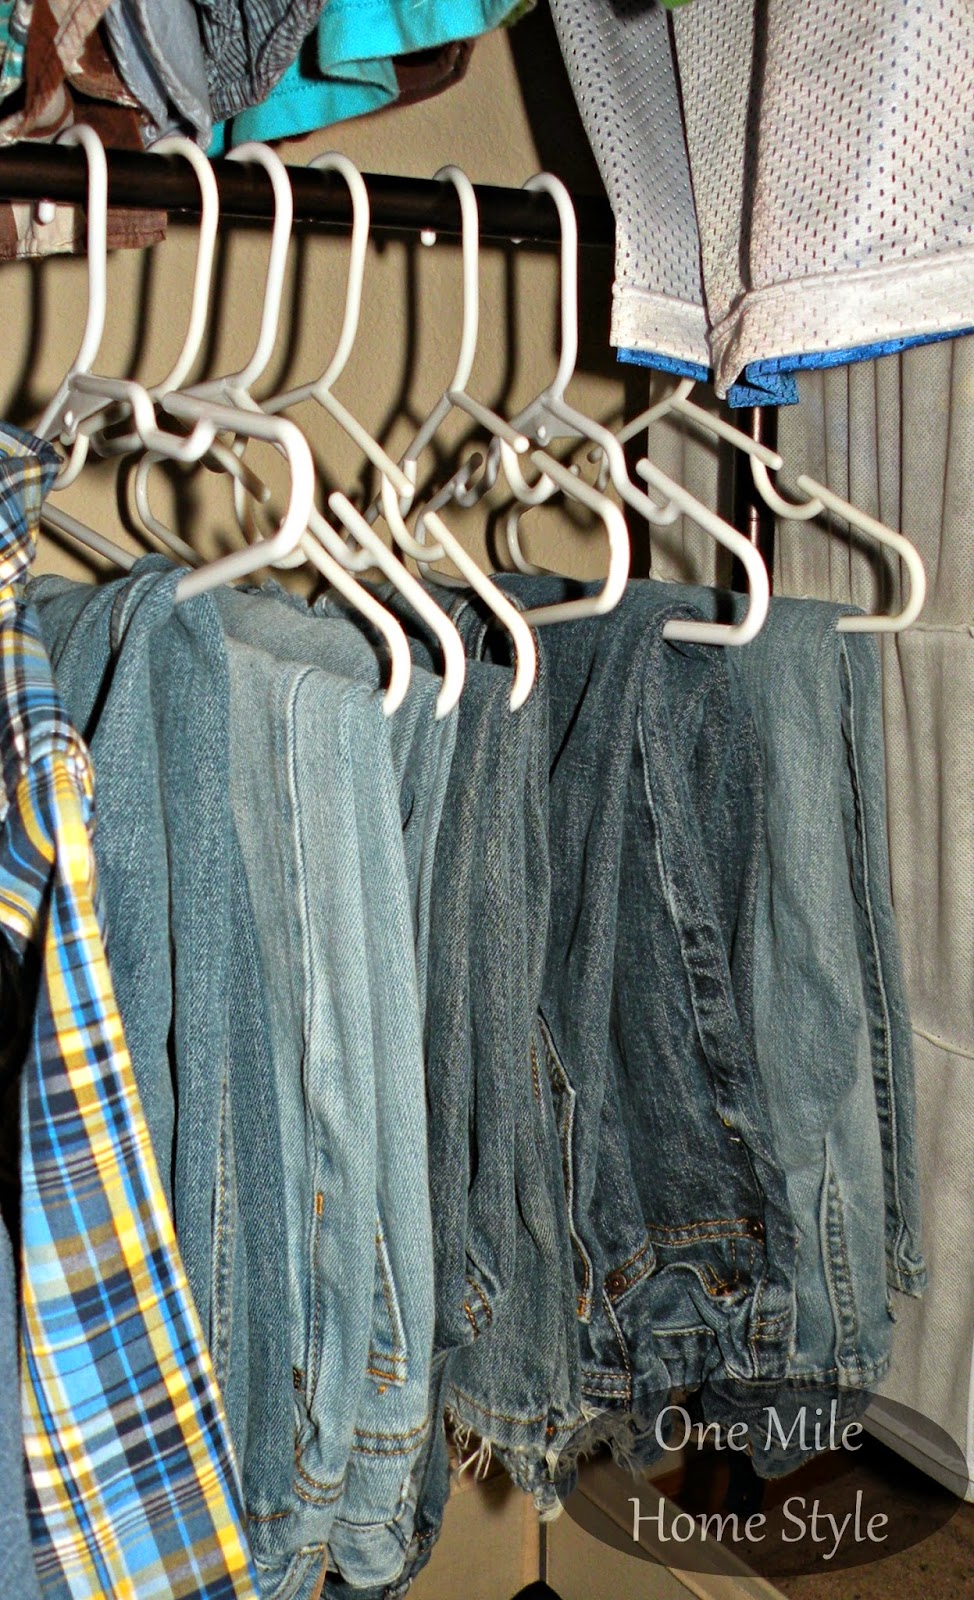 Hanging jeans for better organization